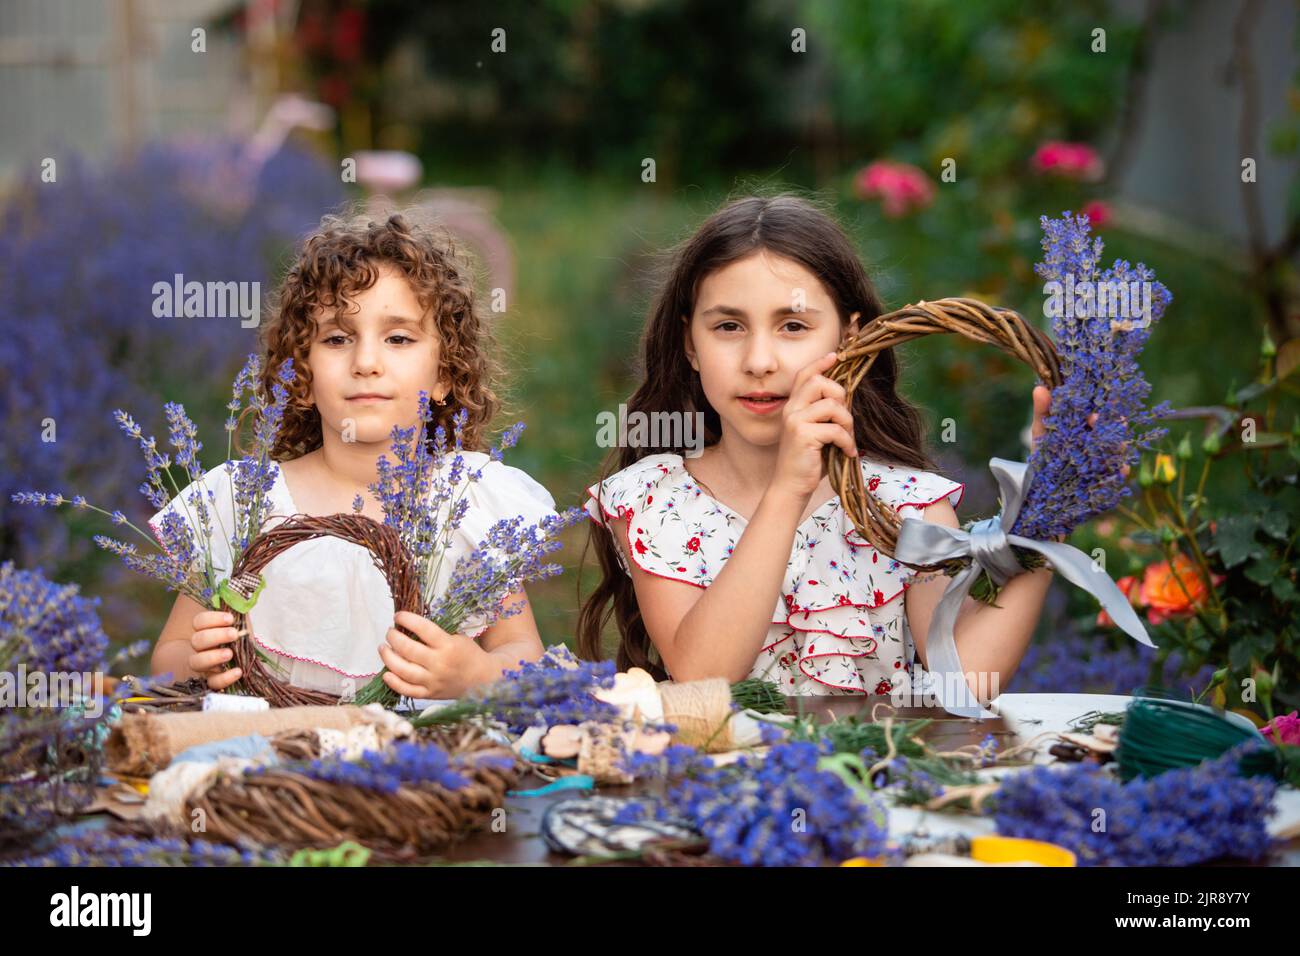 Girls make homemade lavender wreaths as a decor for home or present Stock Photo